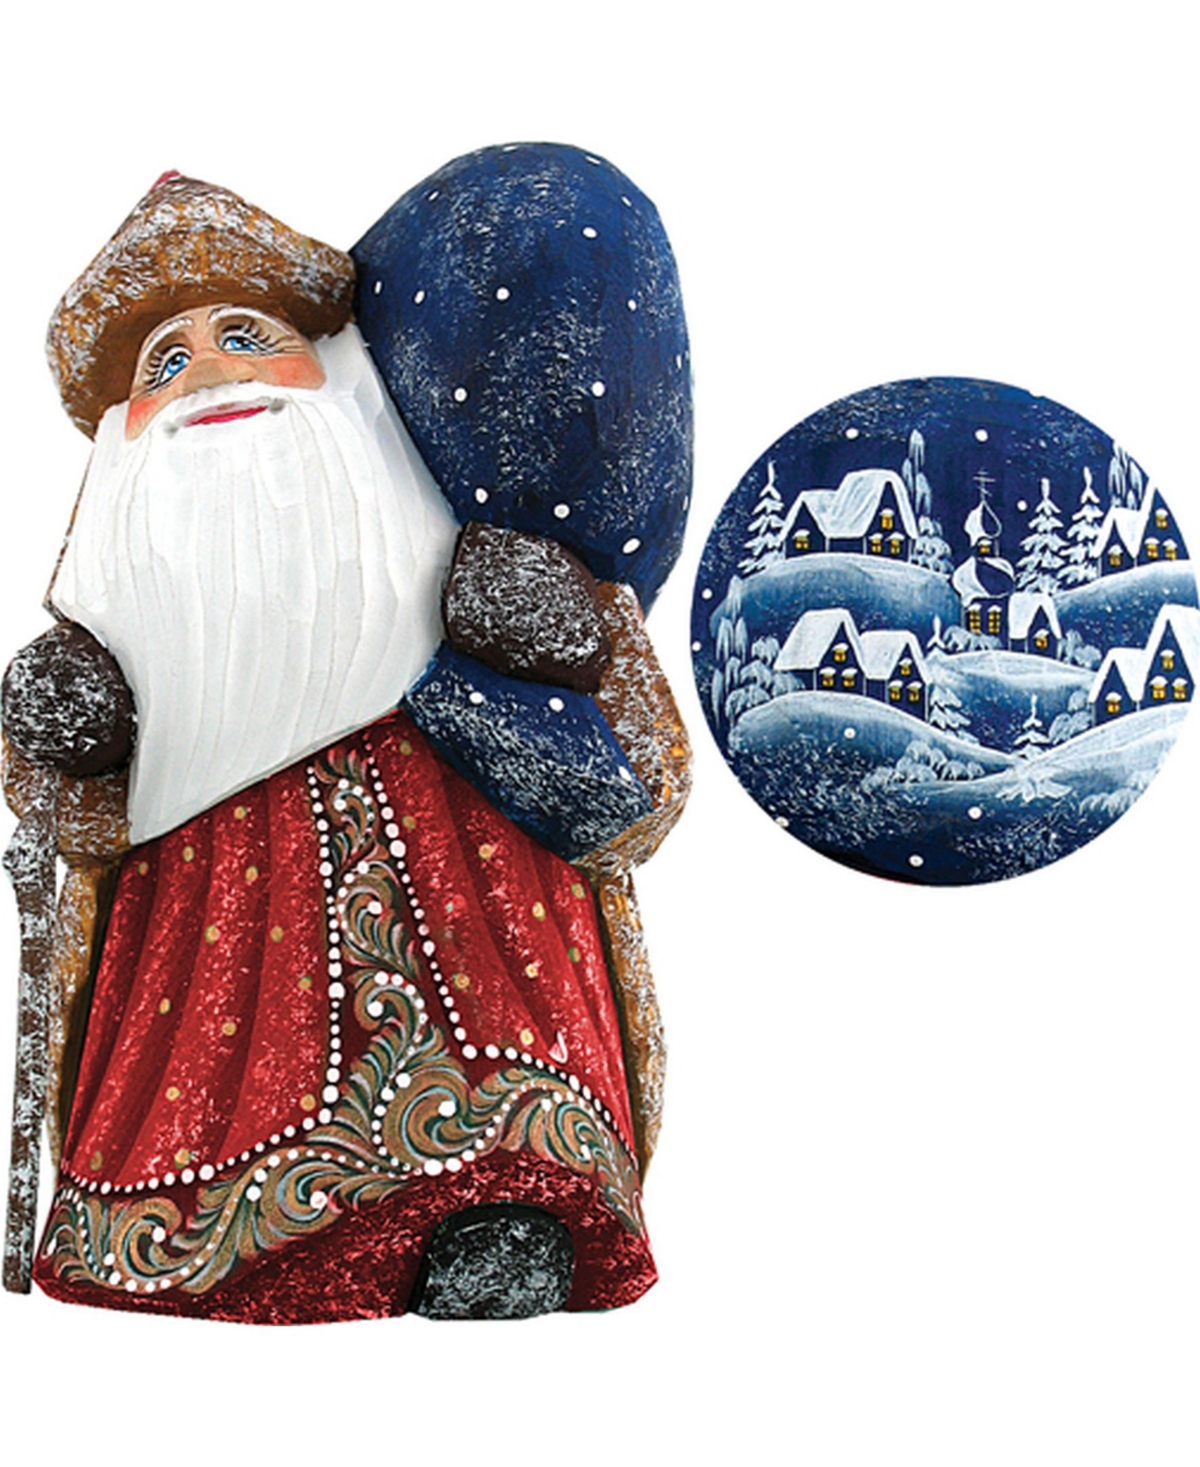 Woodcarved and Hand Painted Santa Yuletide Village Visitor with Bag Figurine - Multi